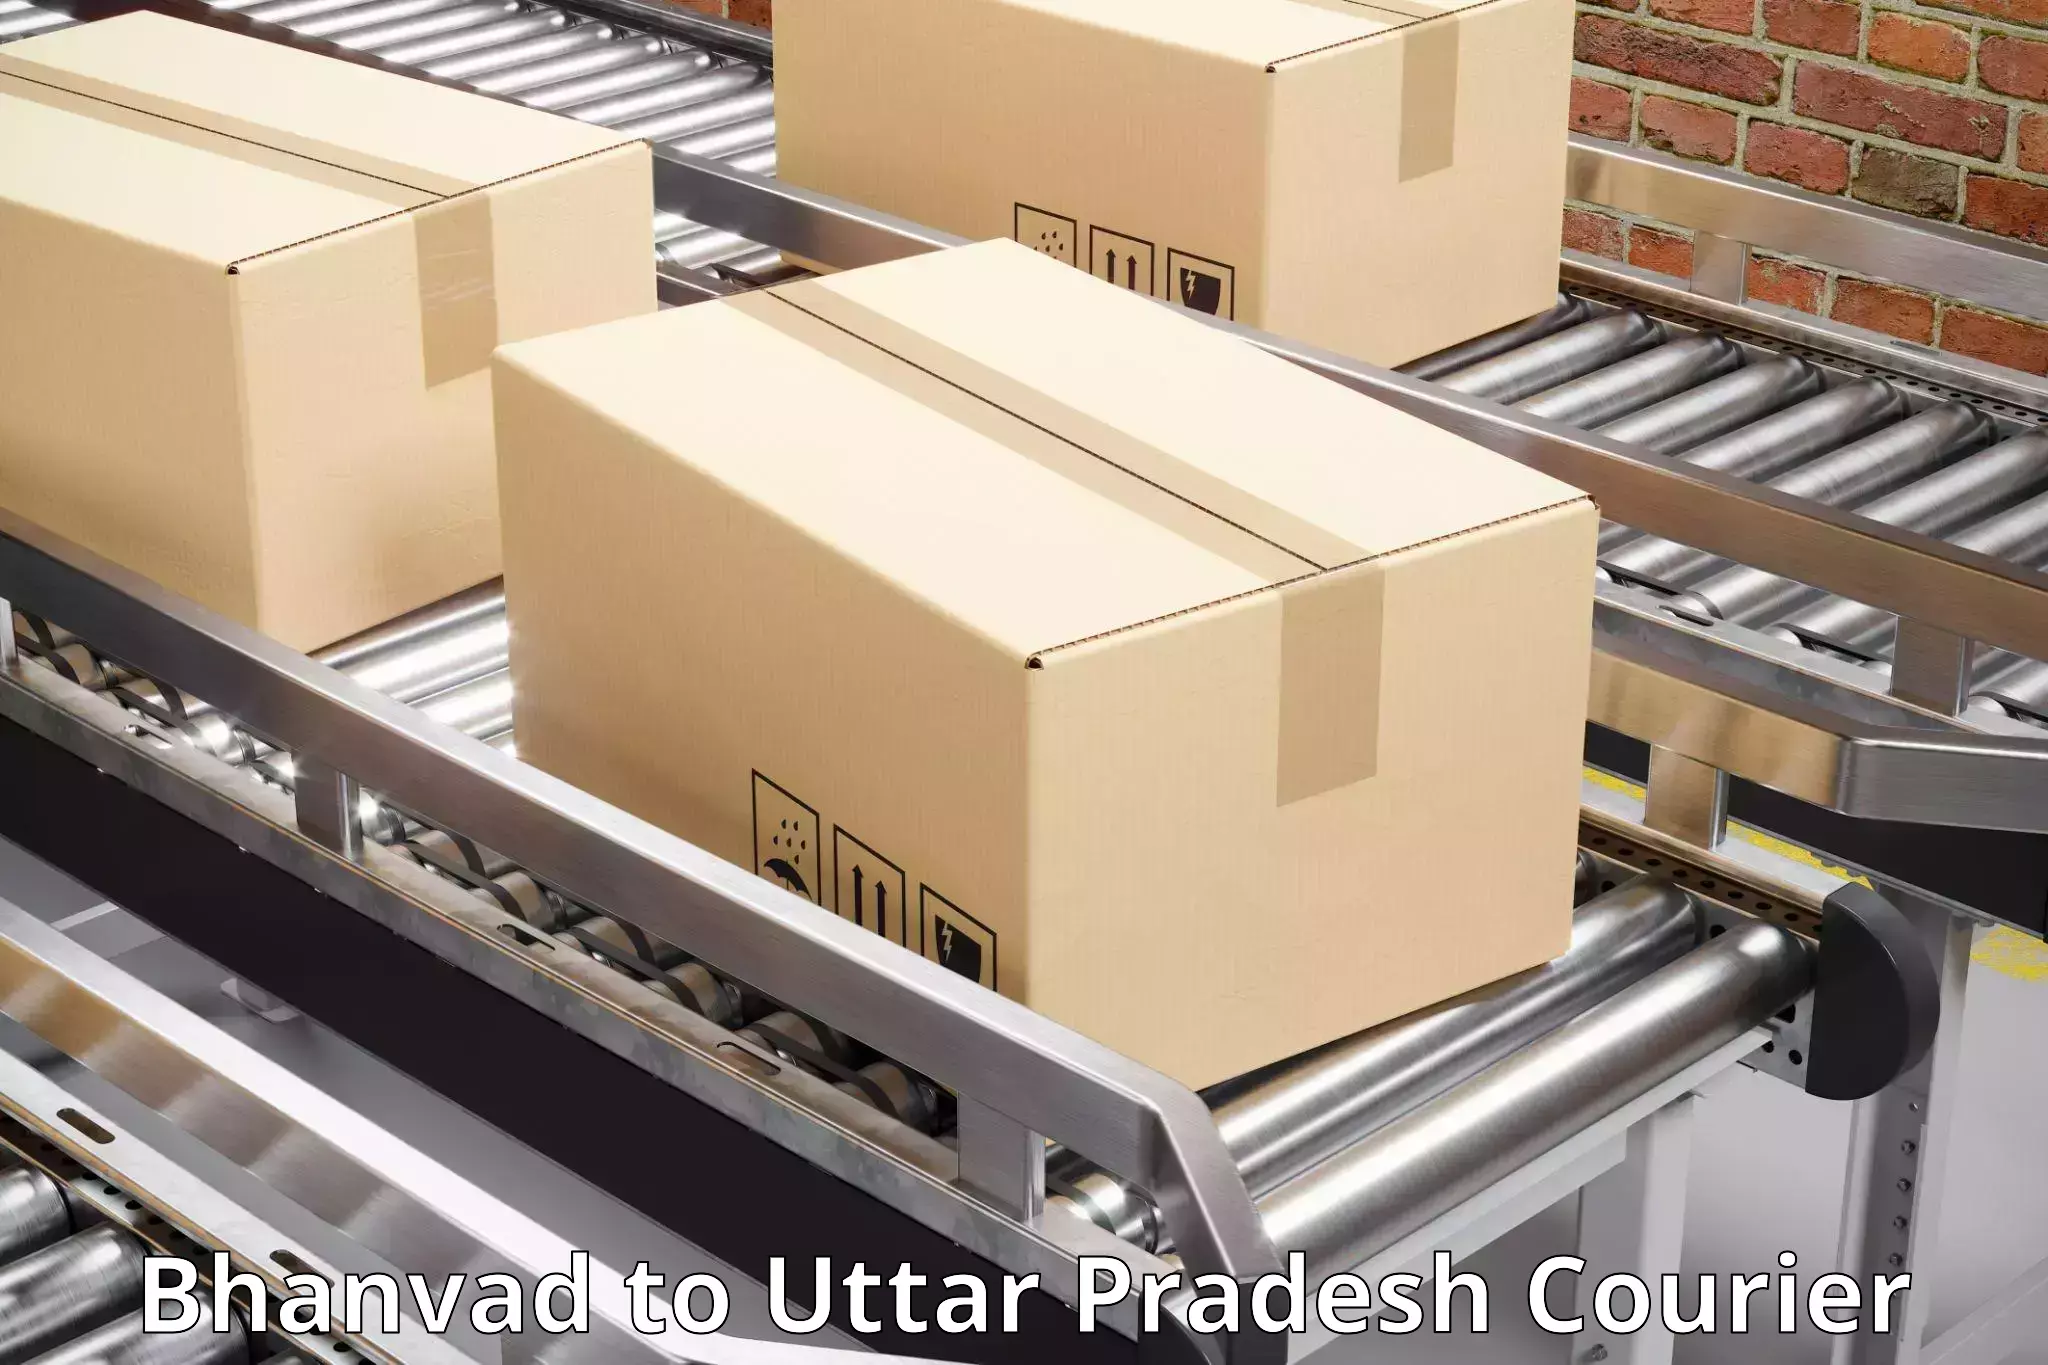 Reliable package handling in Bhanvad to Mahoba